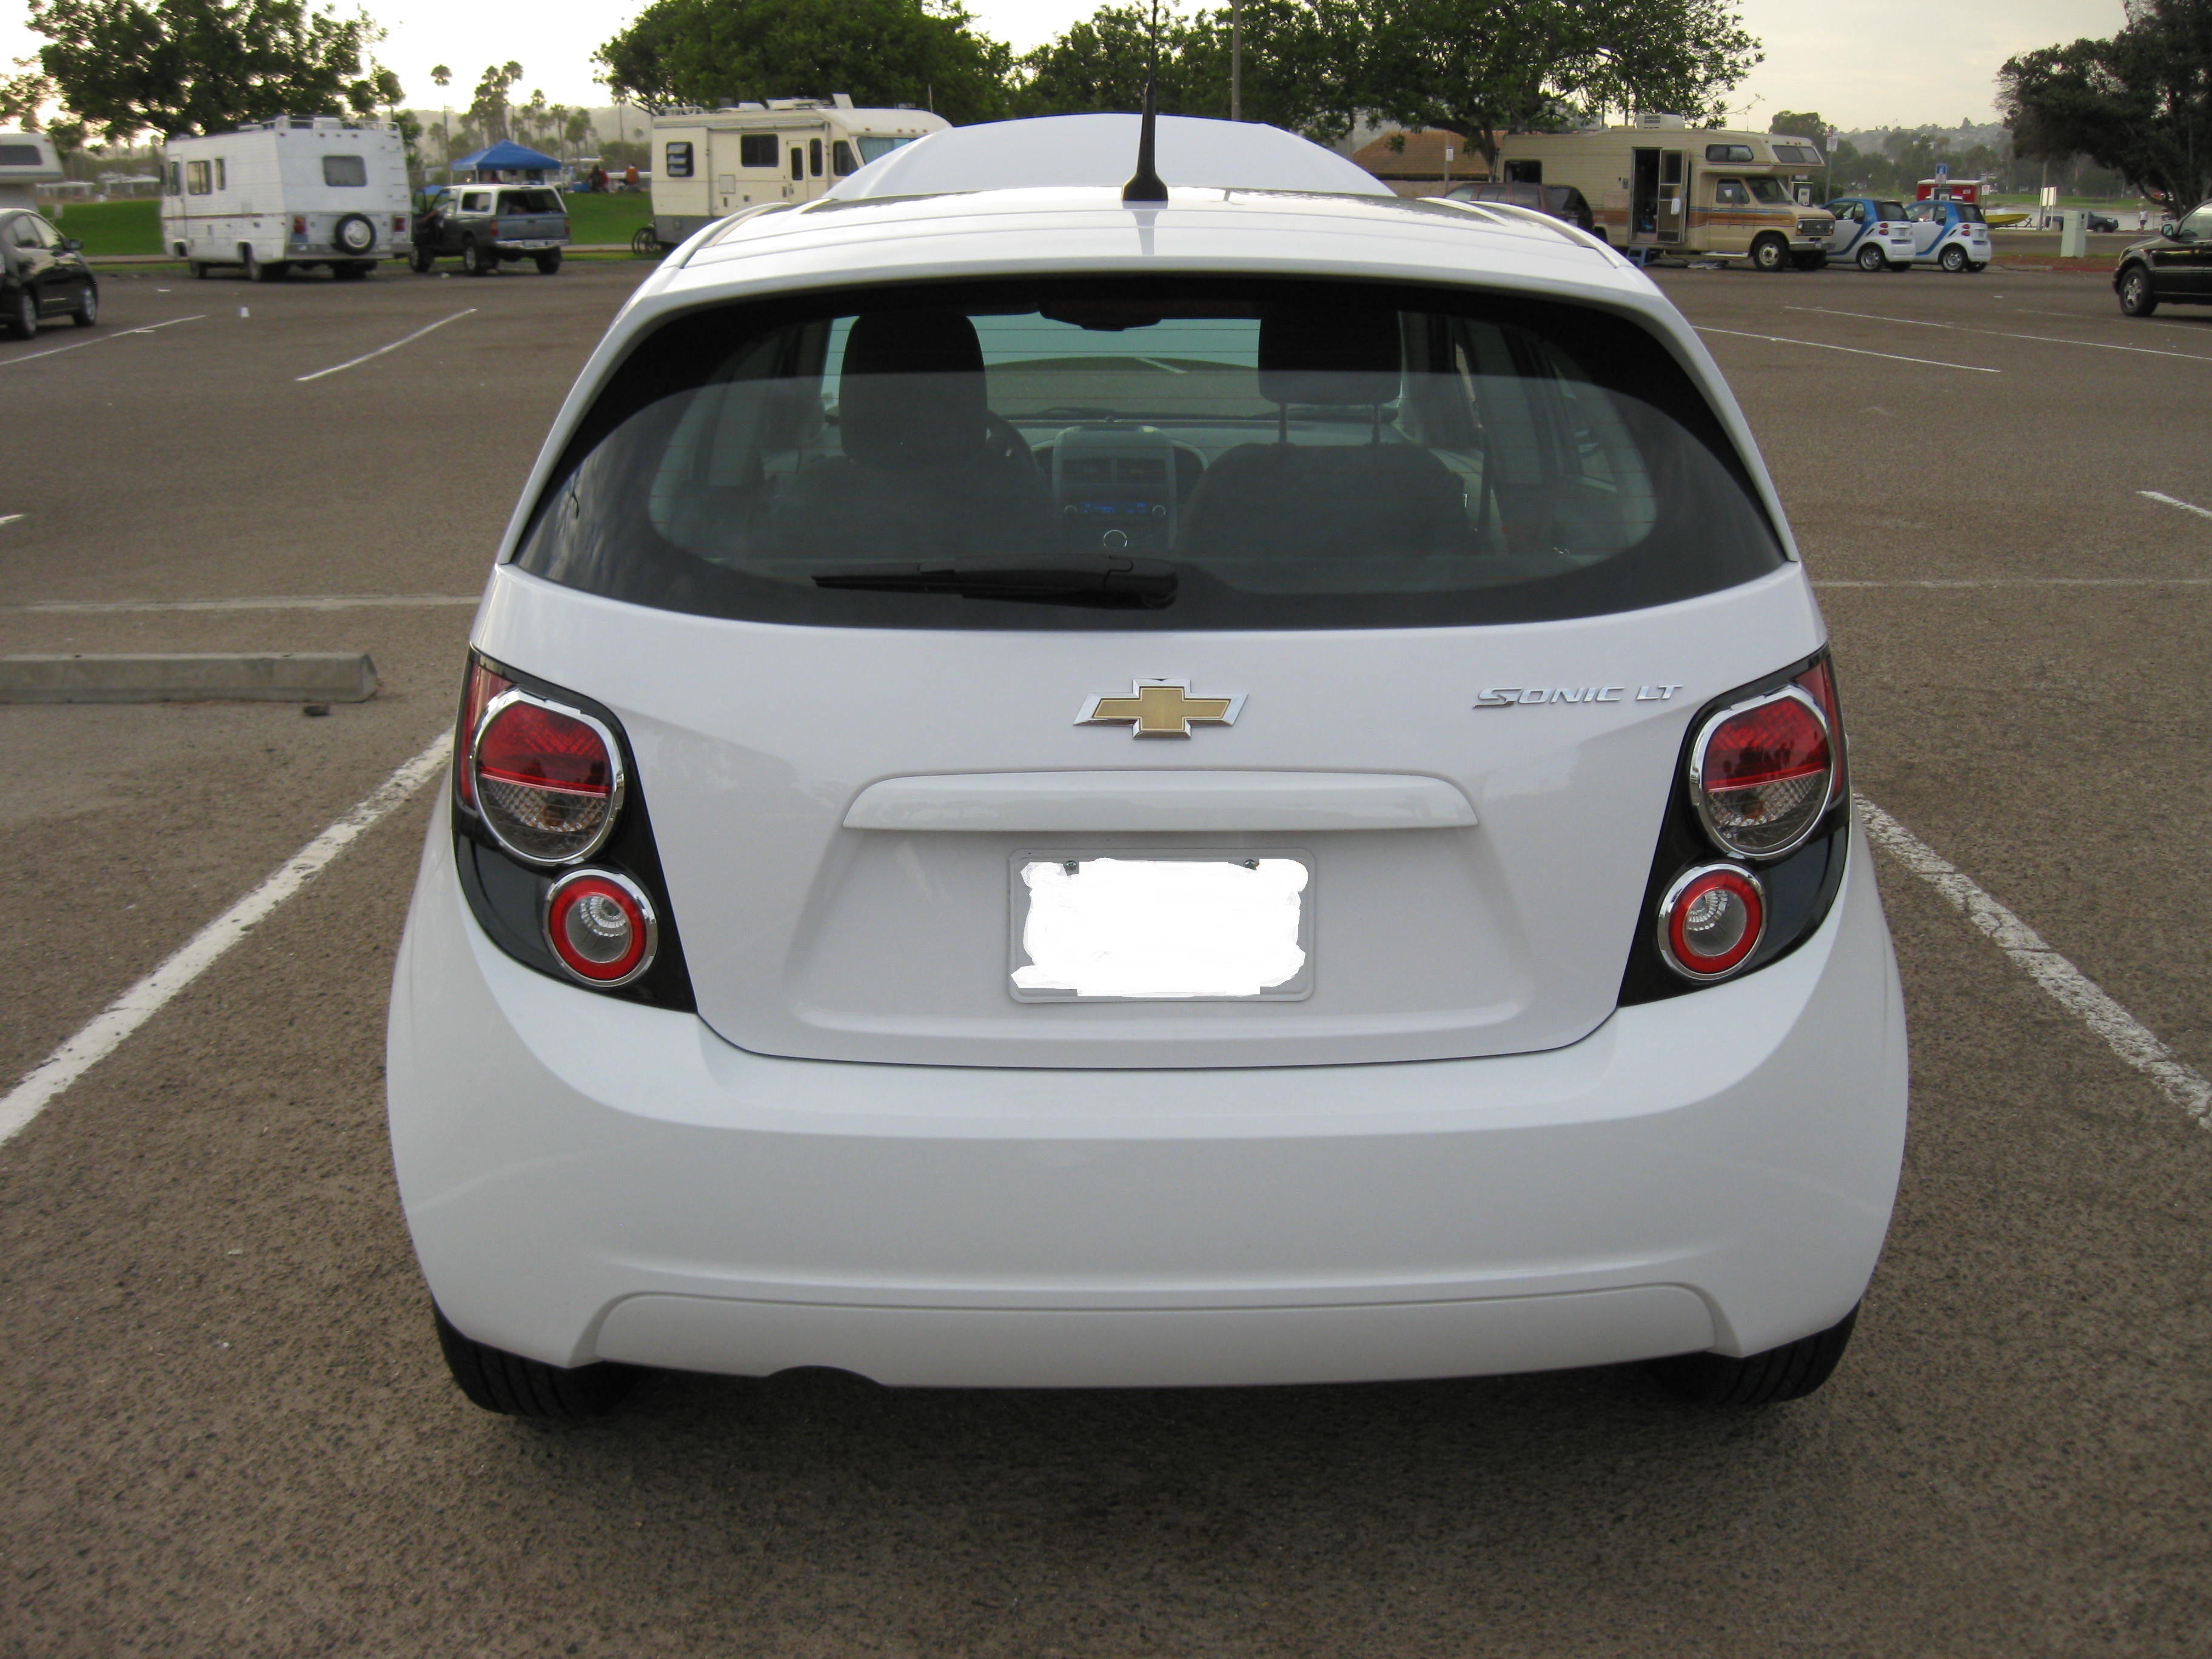 Chevrolet Sonic LT – 2014: Almost “Super” Sonic – Consumer And Car Exam  (C&CE) 2015 Edition on WordPress – © 2008-2015 (C&CE)